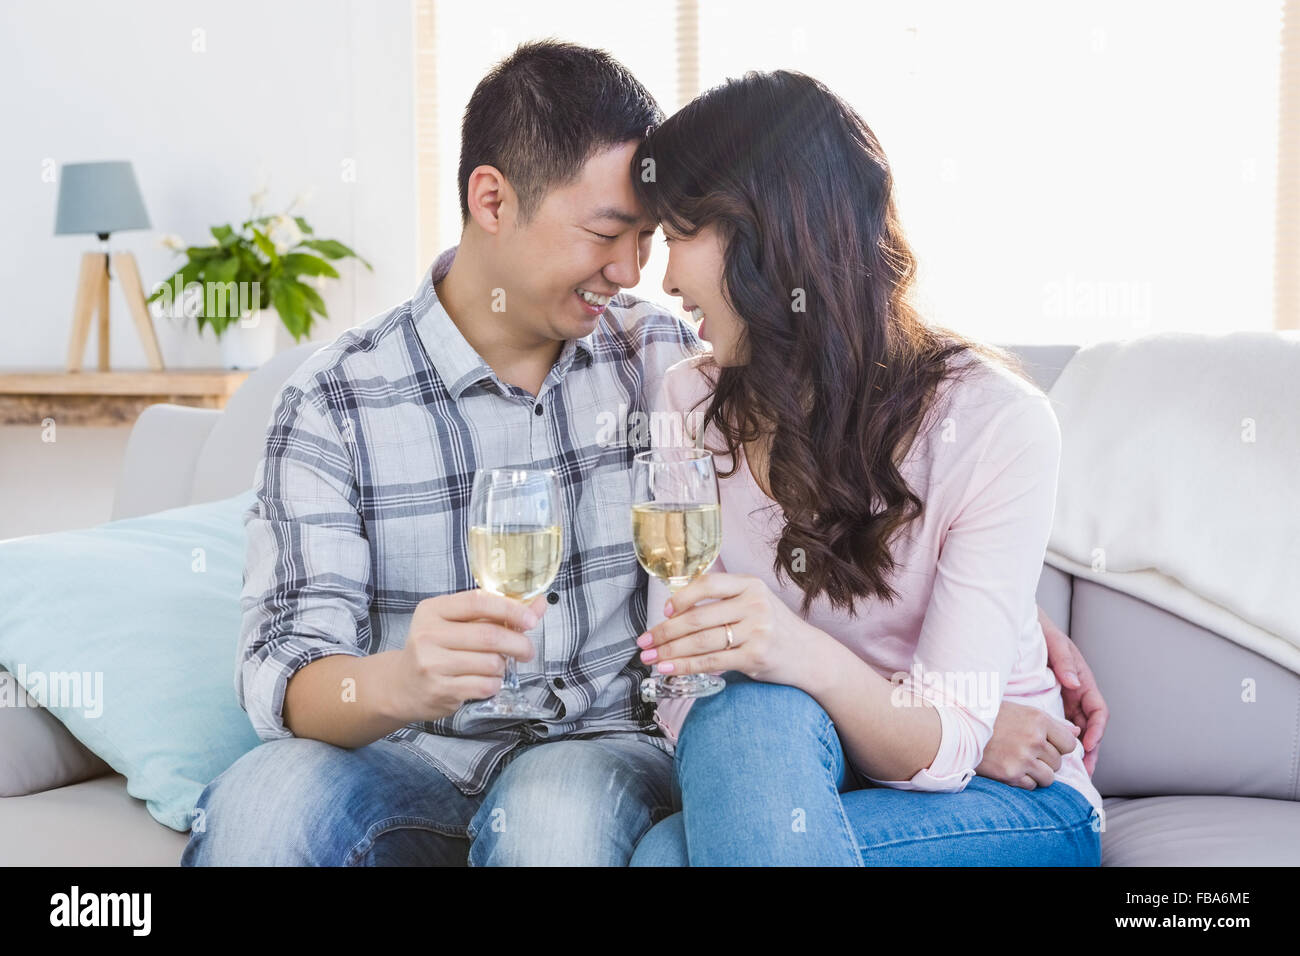 Young smiling couple drinking wine Banque D'Images